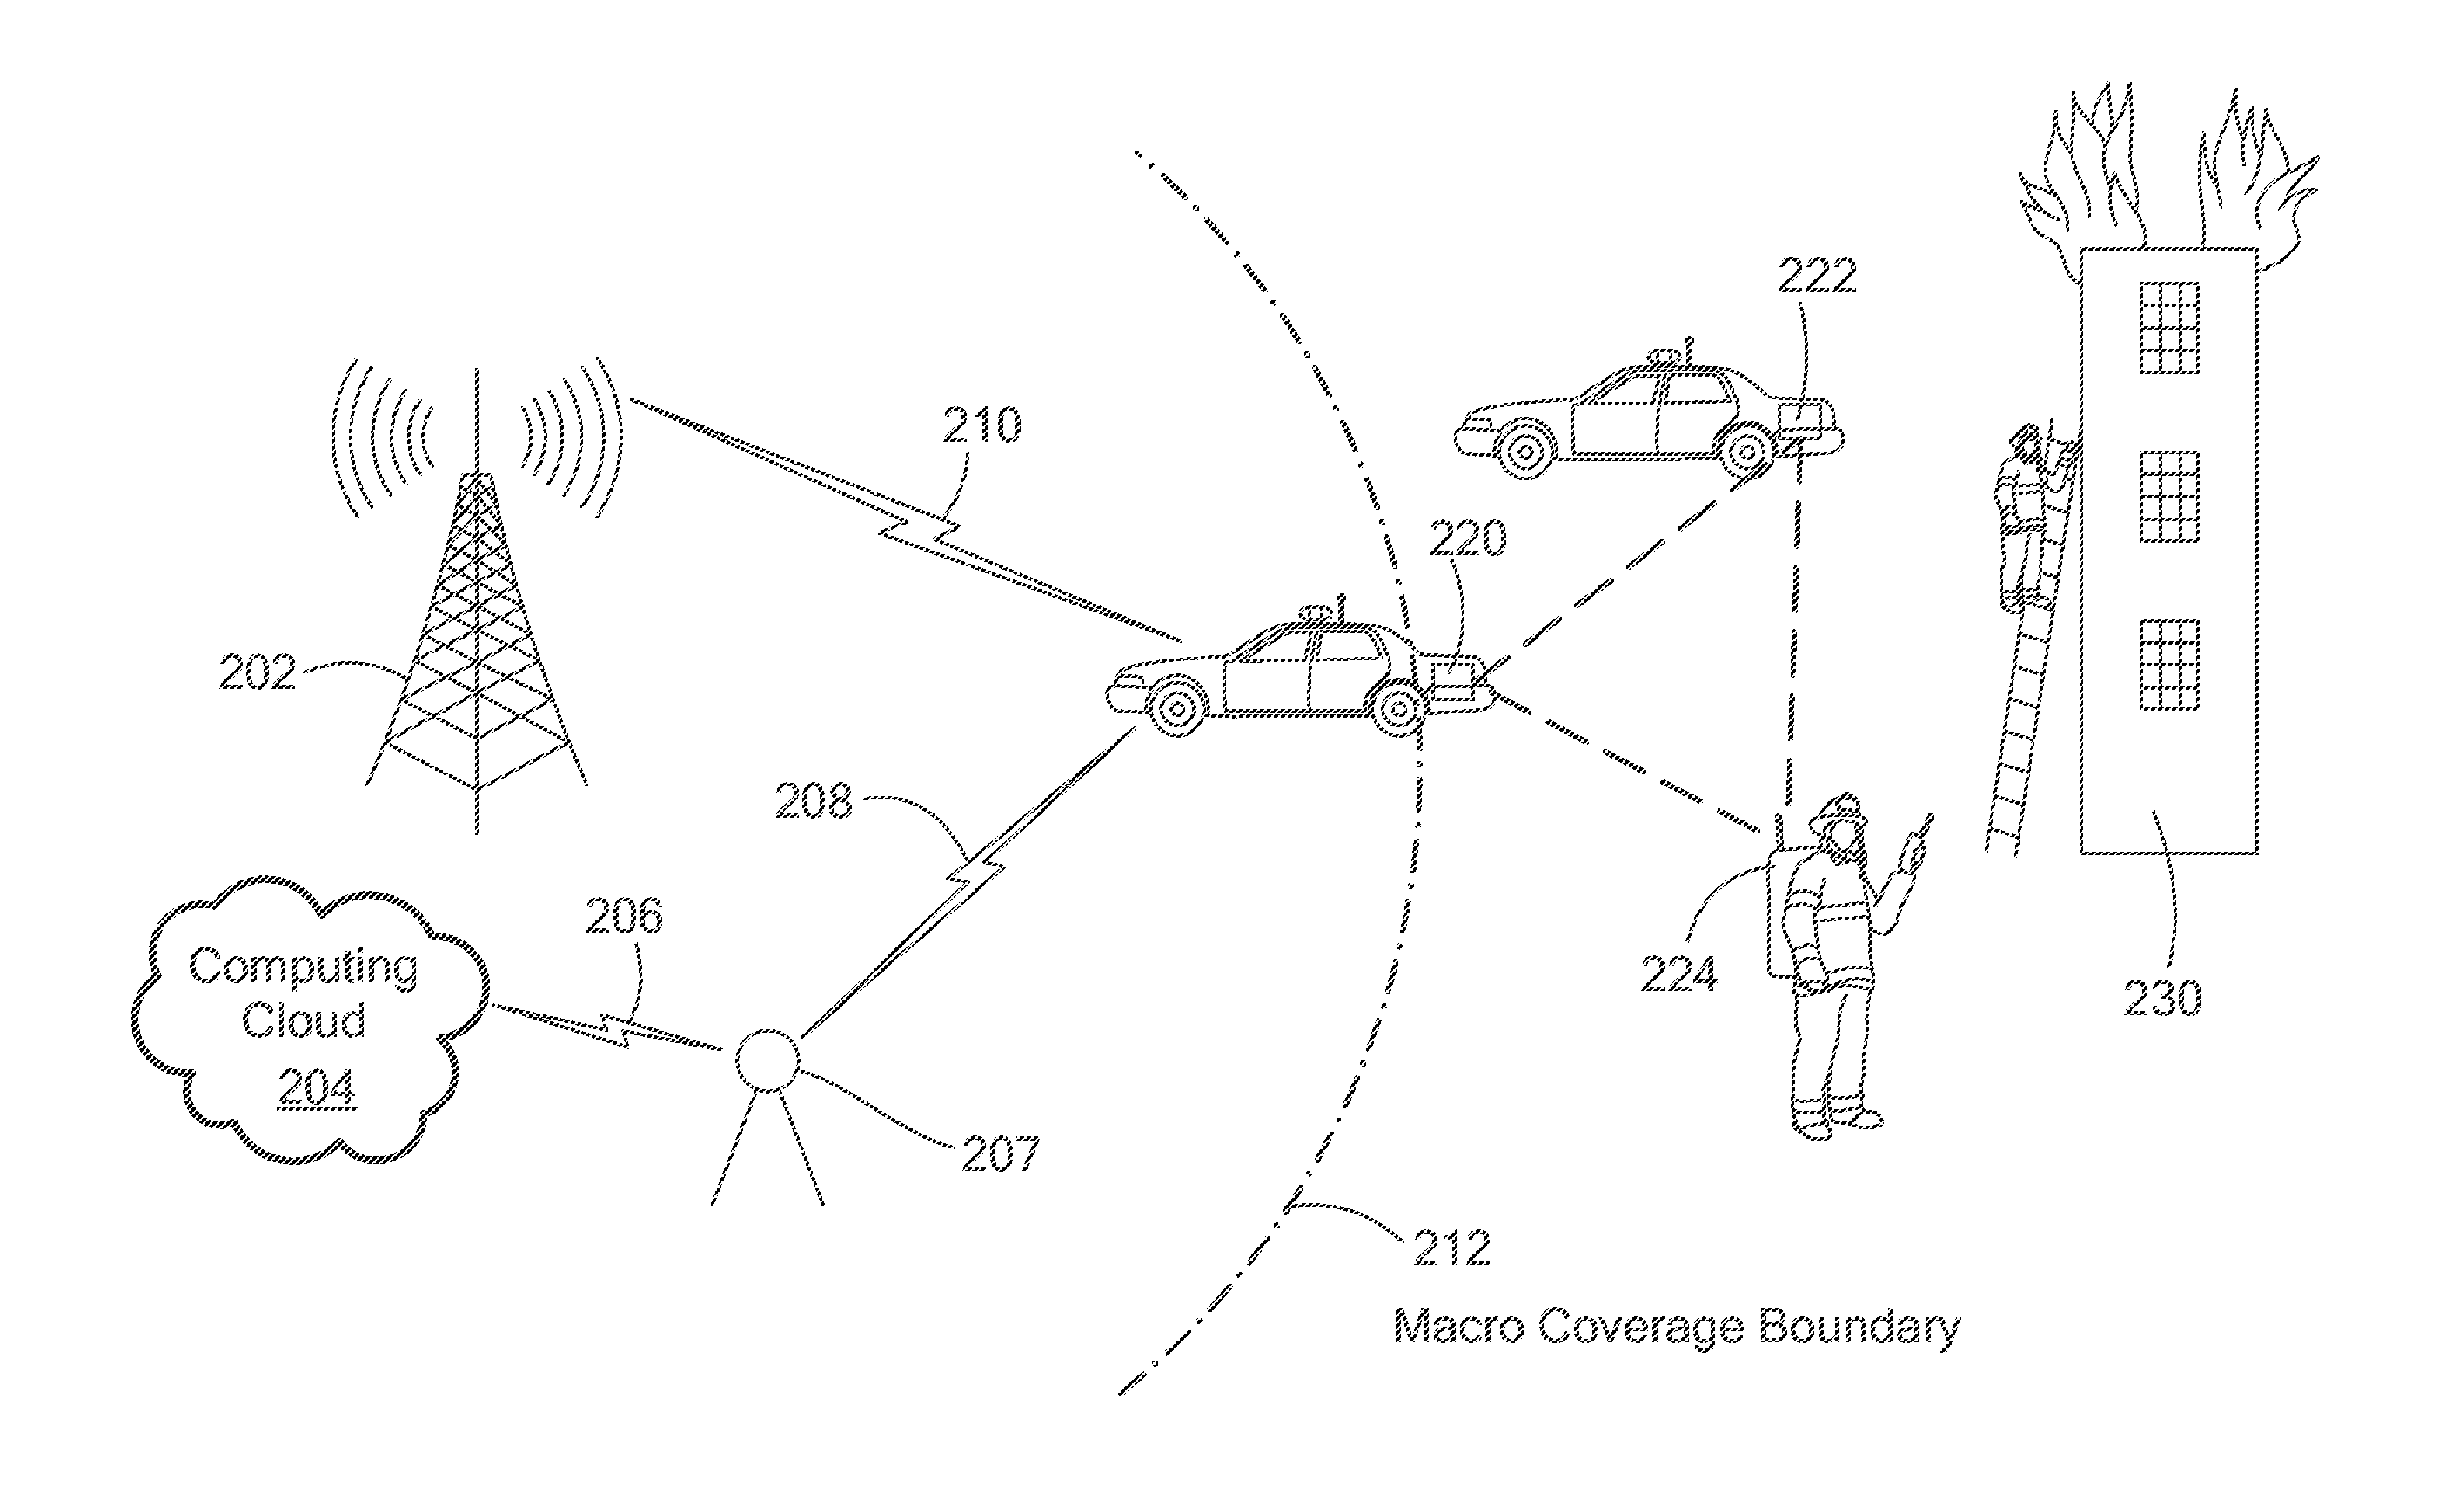 Methods of Enabling Base Station Functionality in a User Equipment